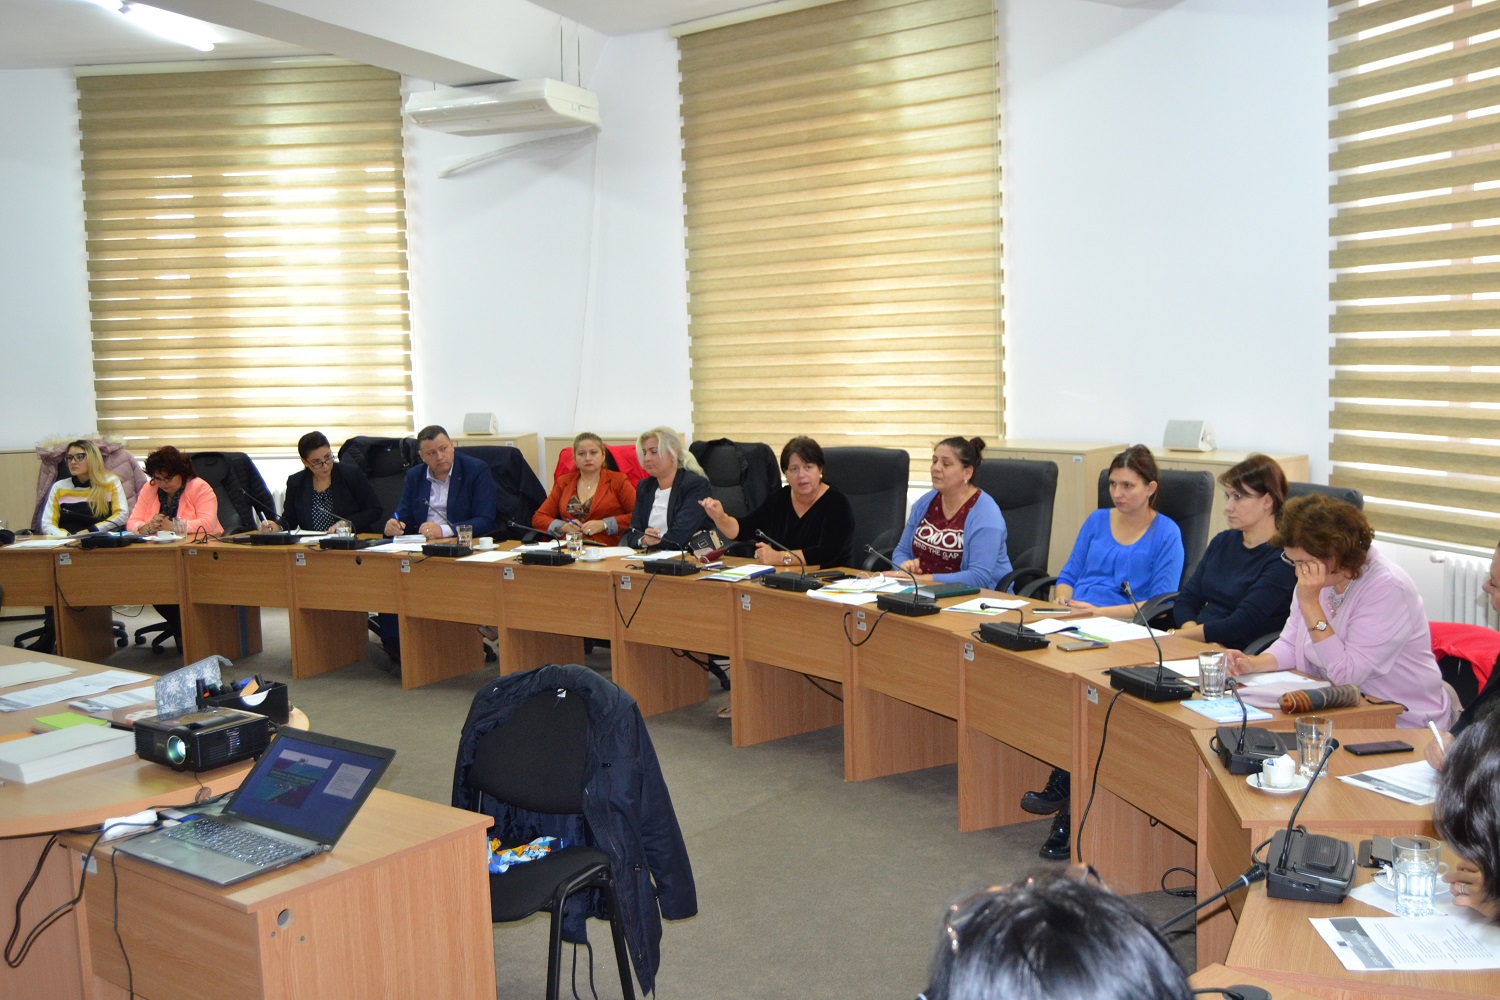 Stakeholders meeting in the Ministry of Environment